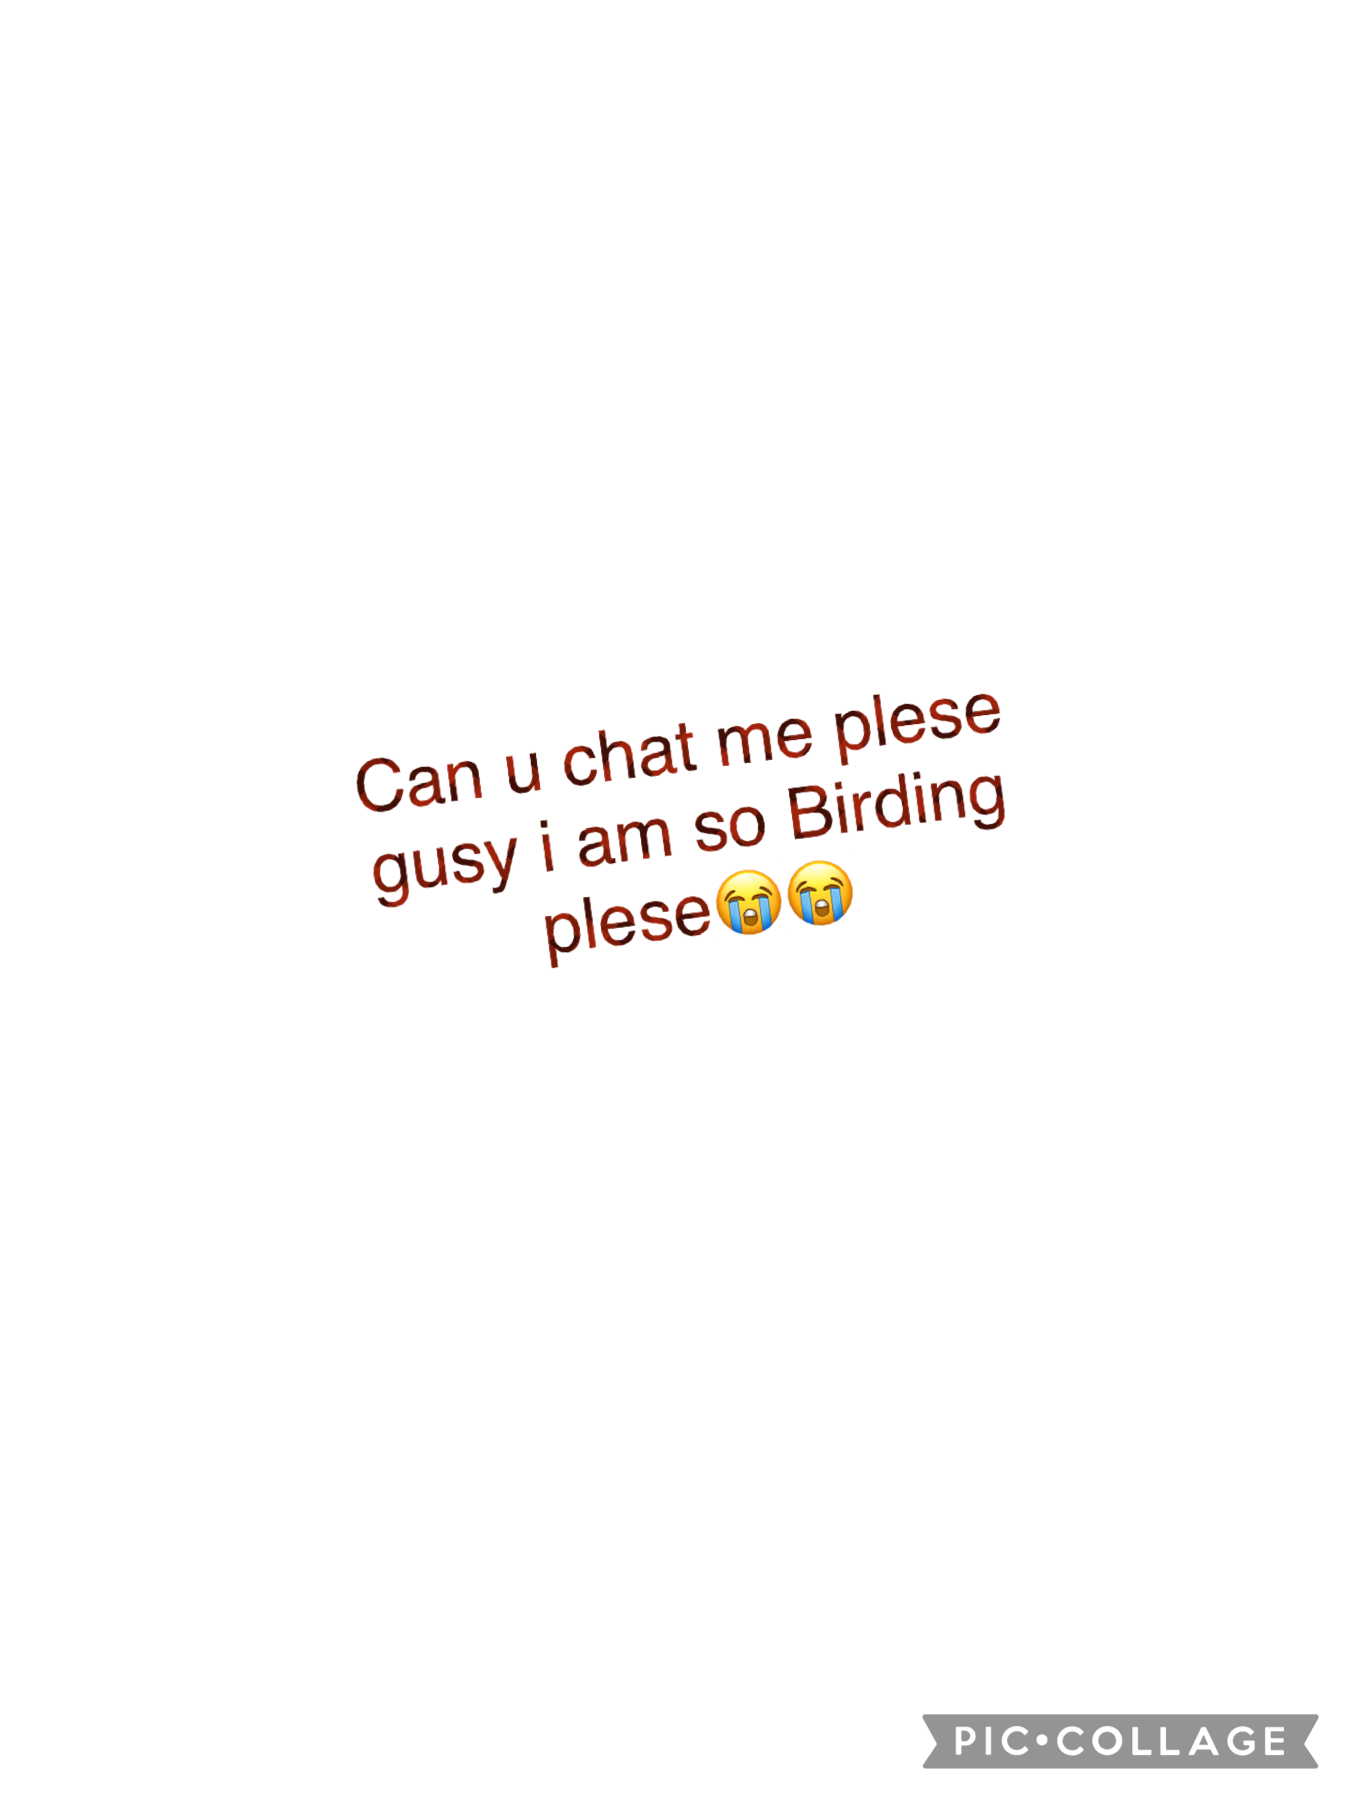 Gusy can we chat i am so Birding